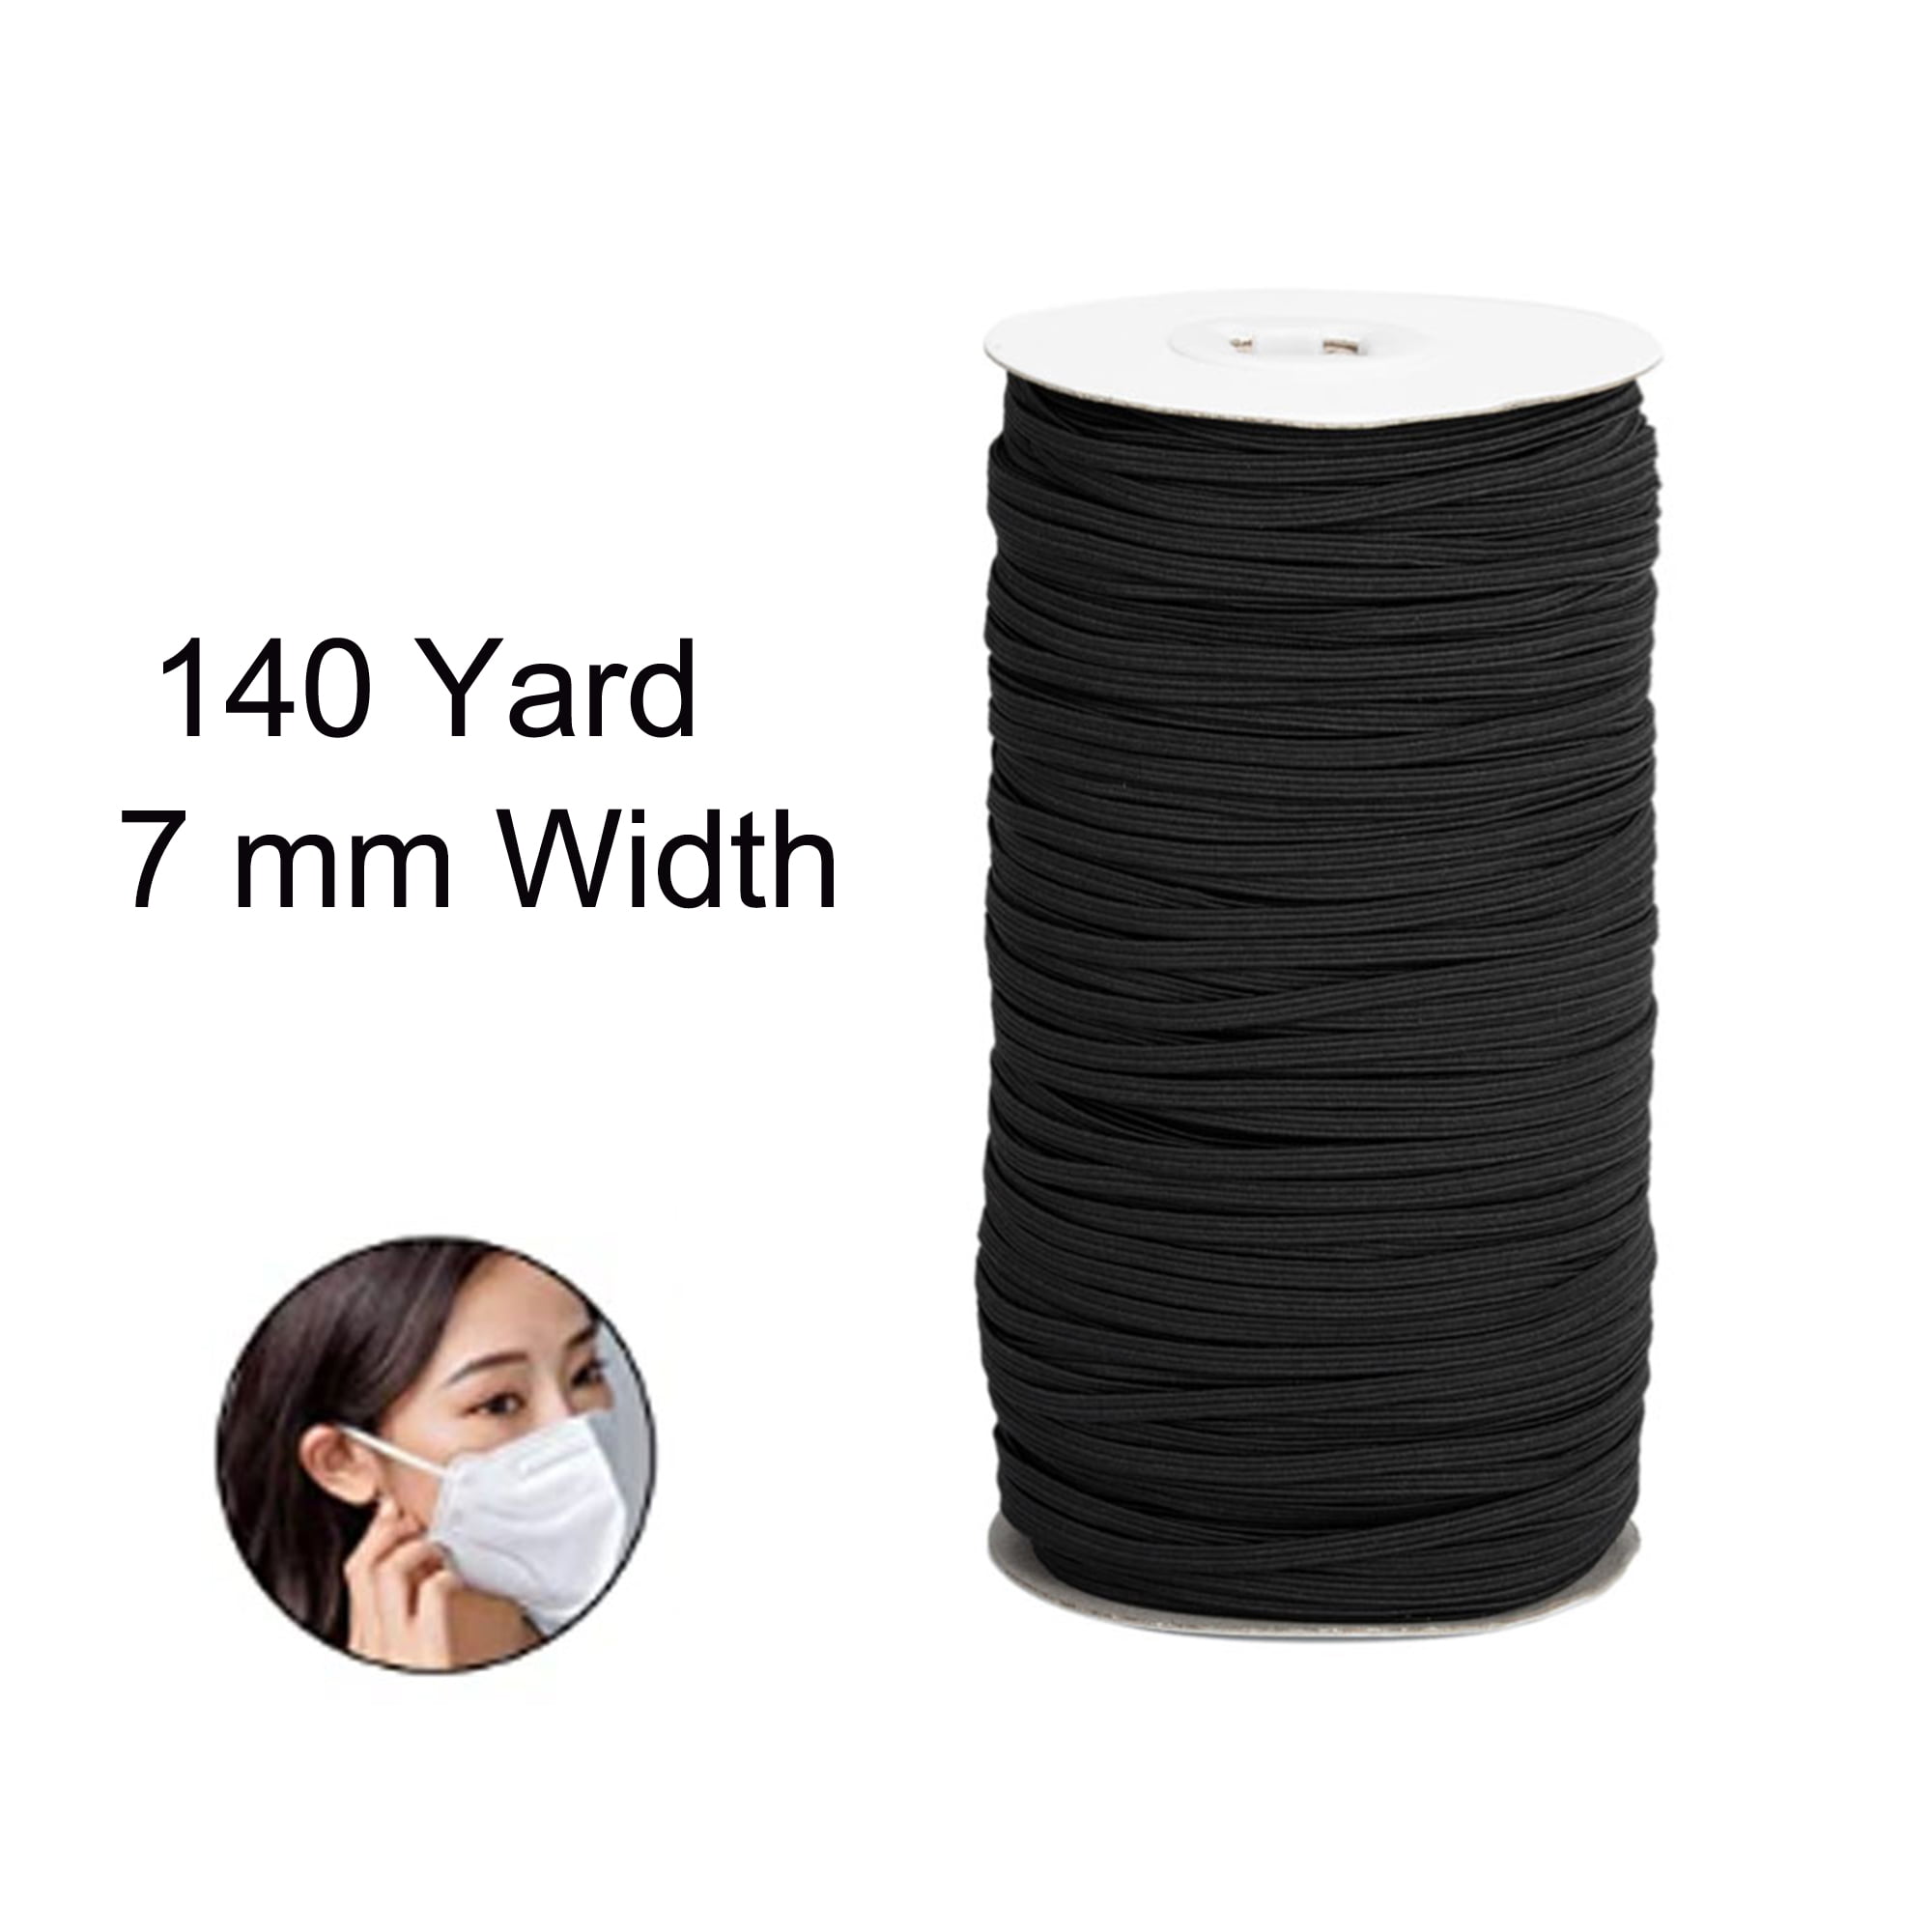 Black 100 Yards Elastic Band Roll 1/3 Inch Flat Elastic Cord High Elasticity Knit Spool Drawstring Rope for Sewing Crafts